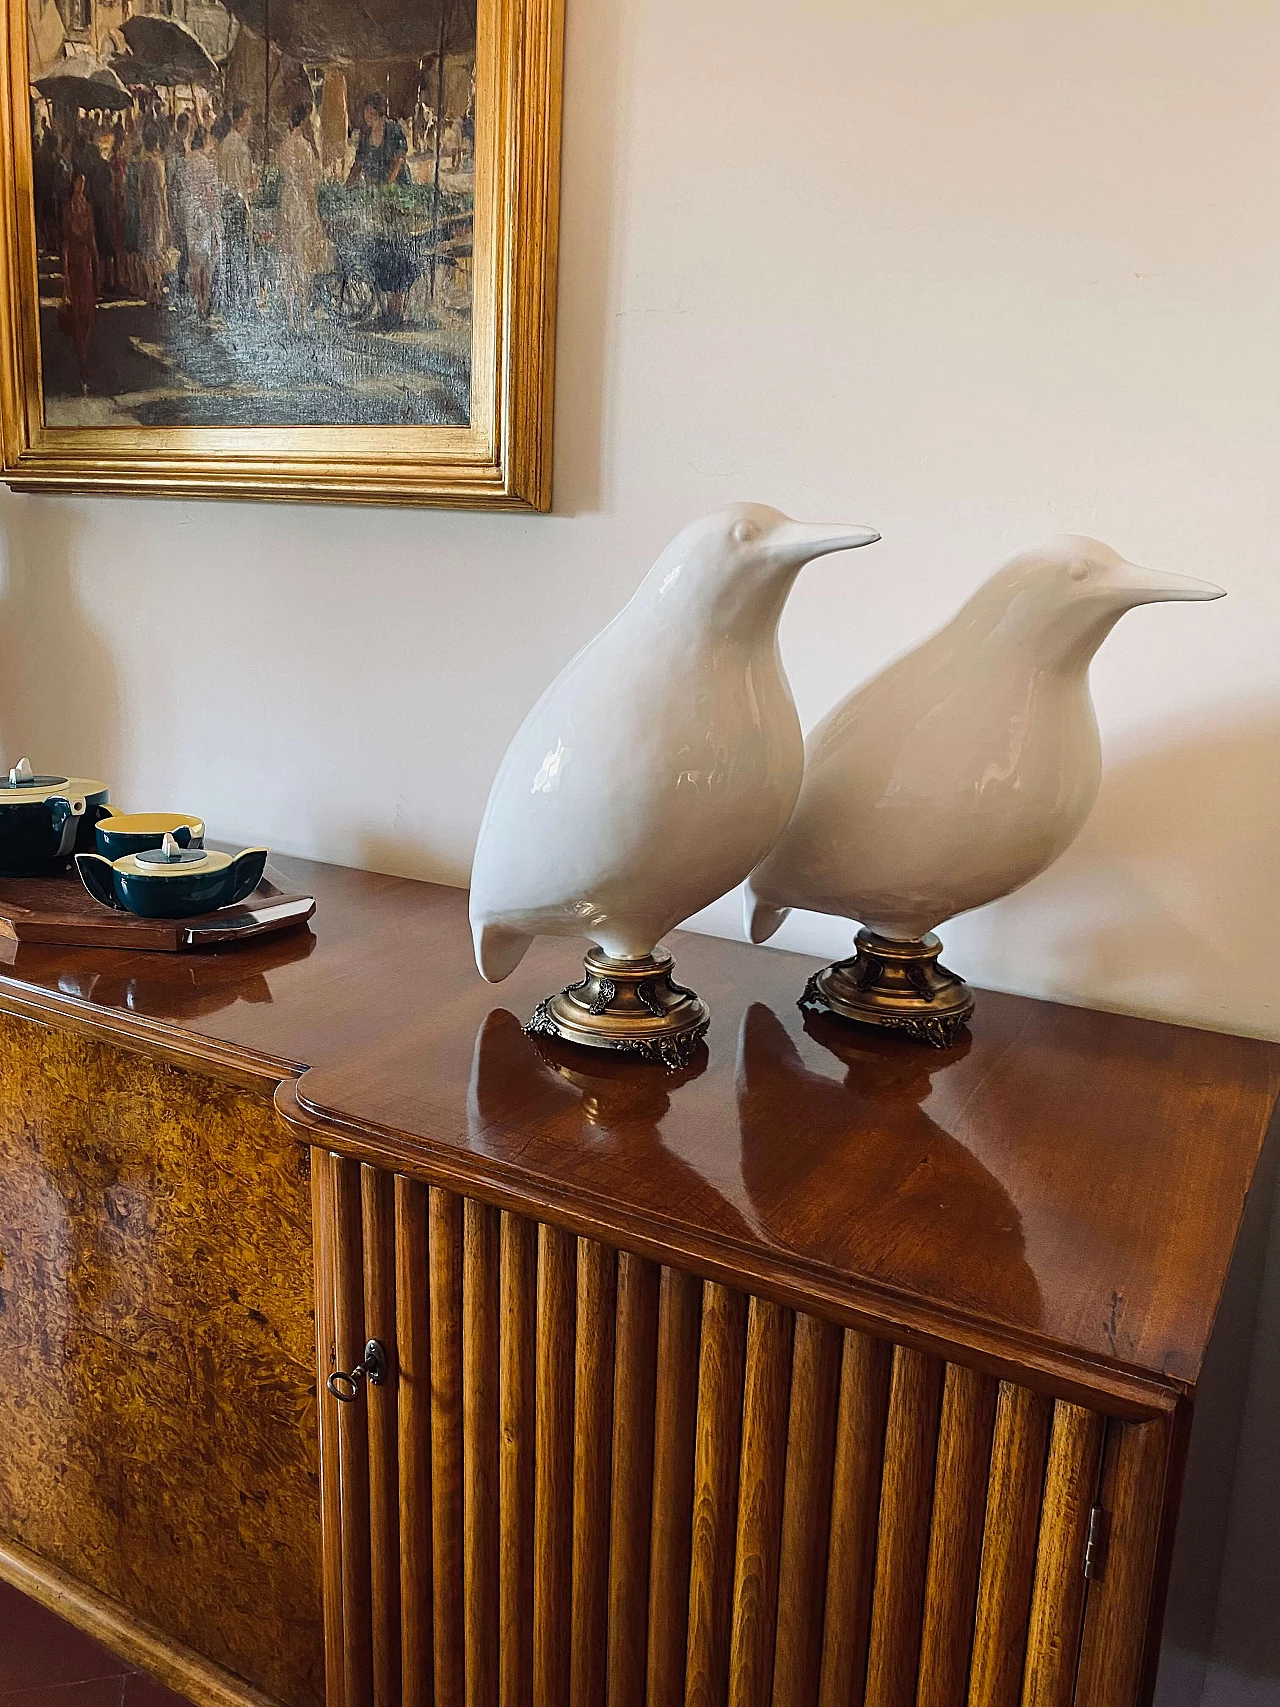 Pair of large ceramic and brass bird sculptures, early 20th century 1330610